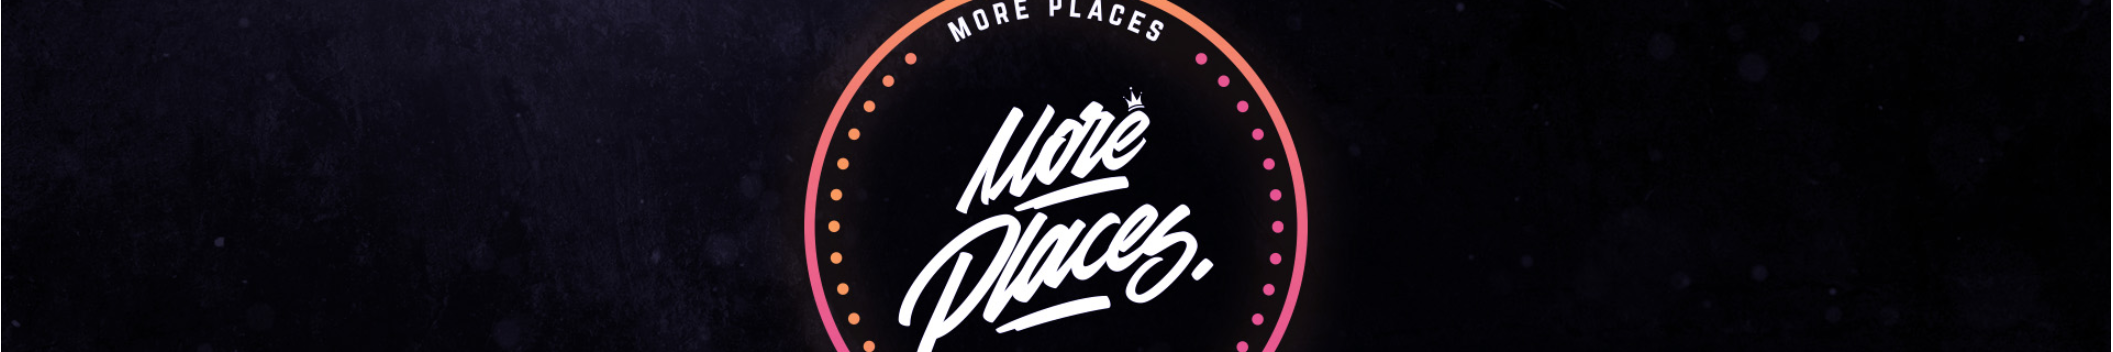 More Places